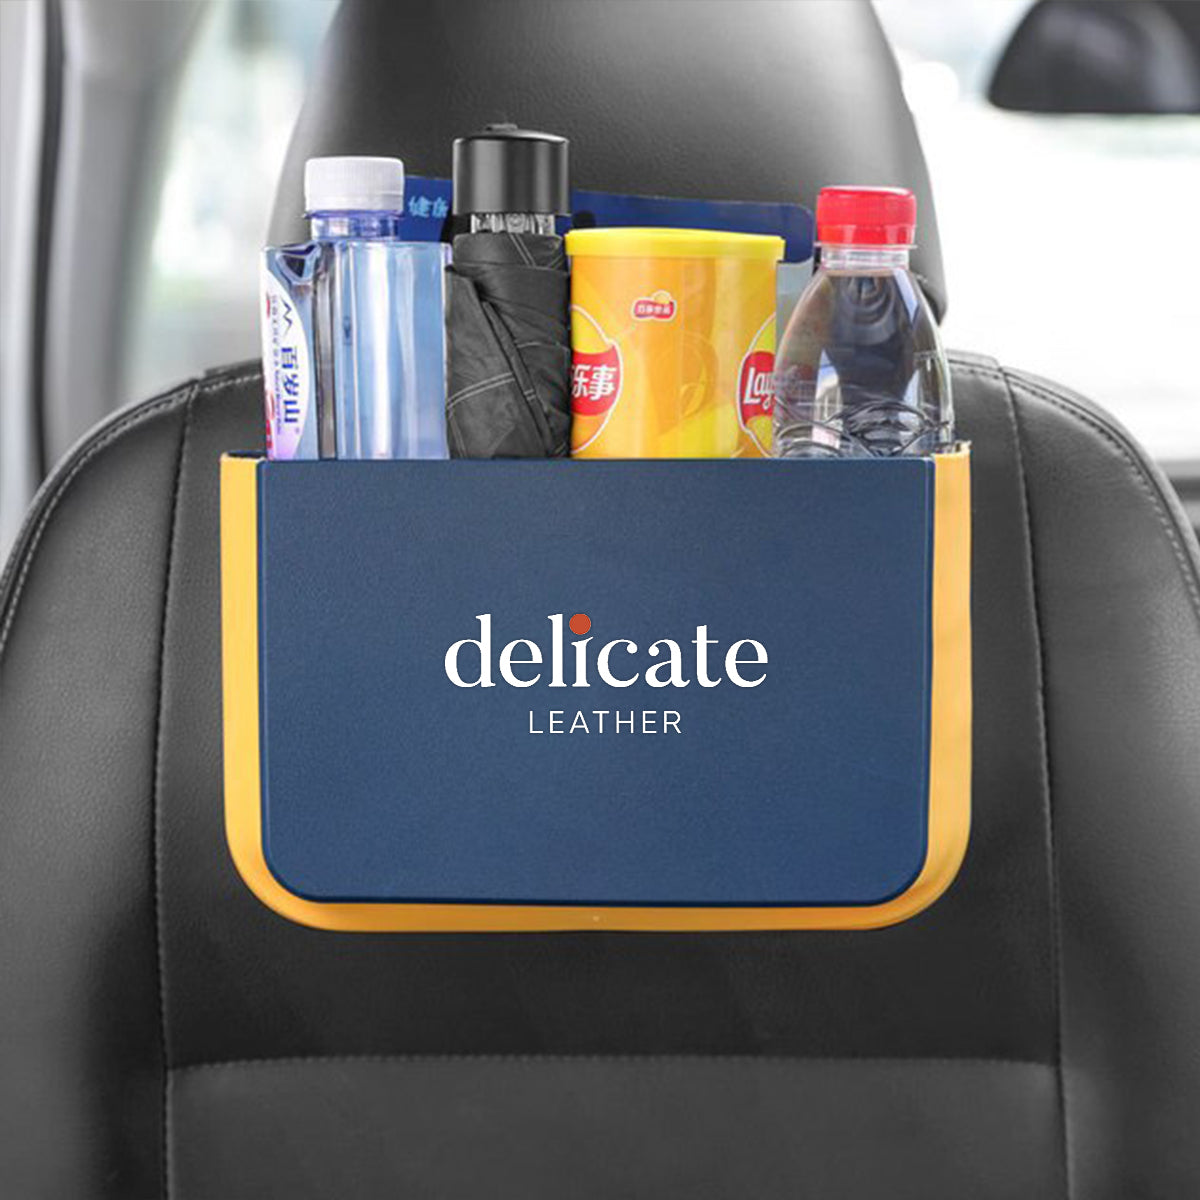 Delicate Leather Hanging Waterproof Car Trash can-Foldable, Custom For Your Cars, Waterproof, and Equipped with Cup Holders and Trays. Multi-Purpose, Car Accessories CA11992 - Delicate Leather